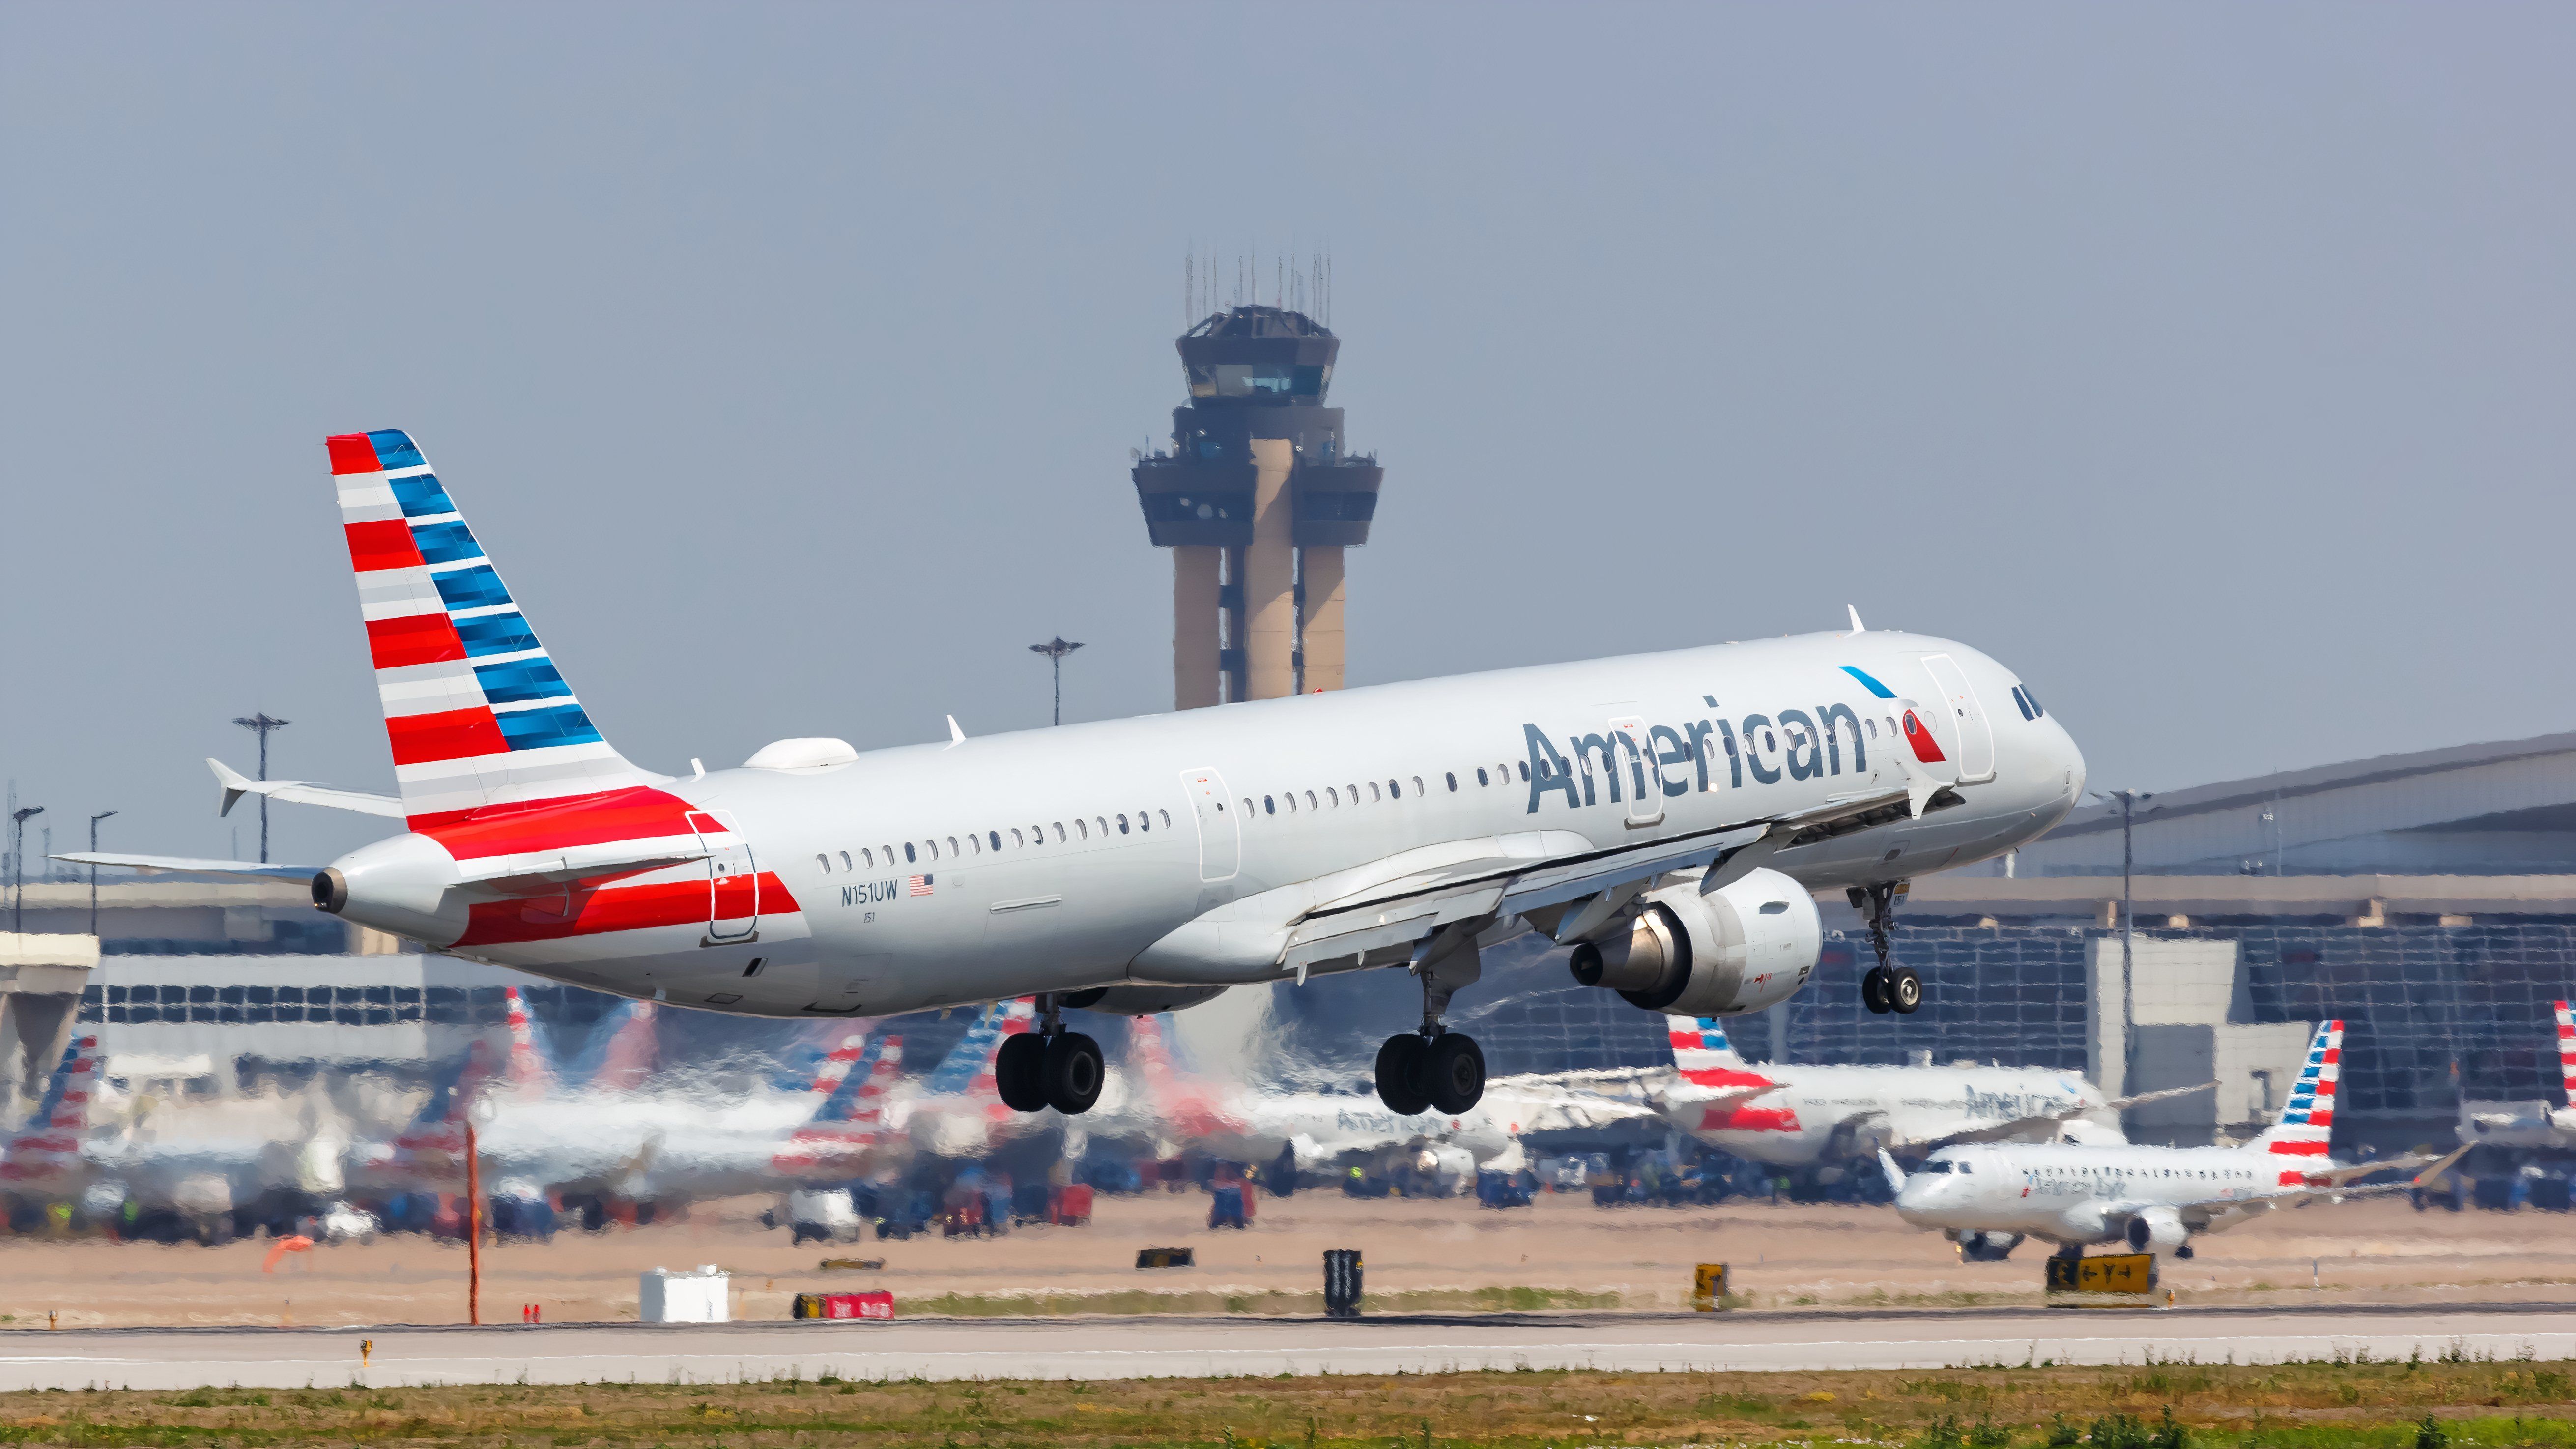 An American Airlines plane takes off at DFW